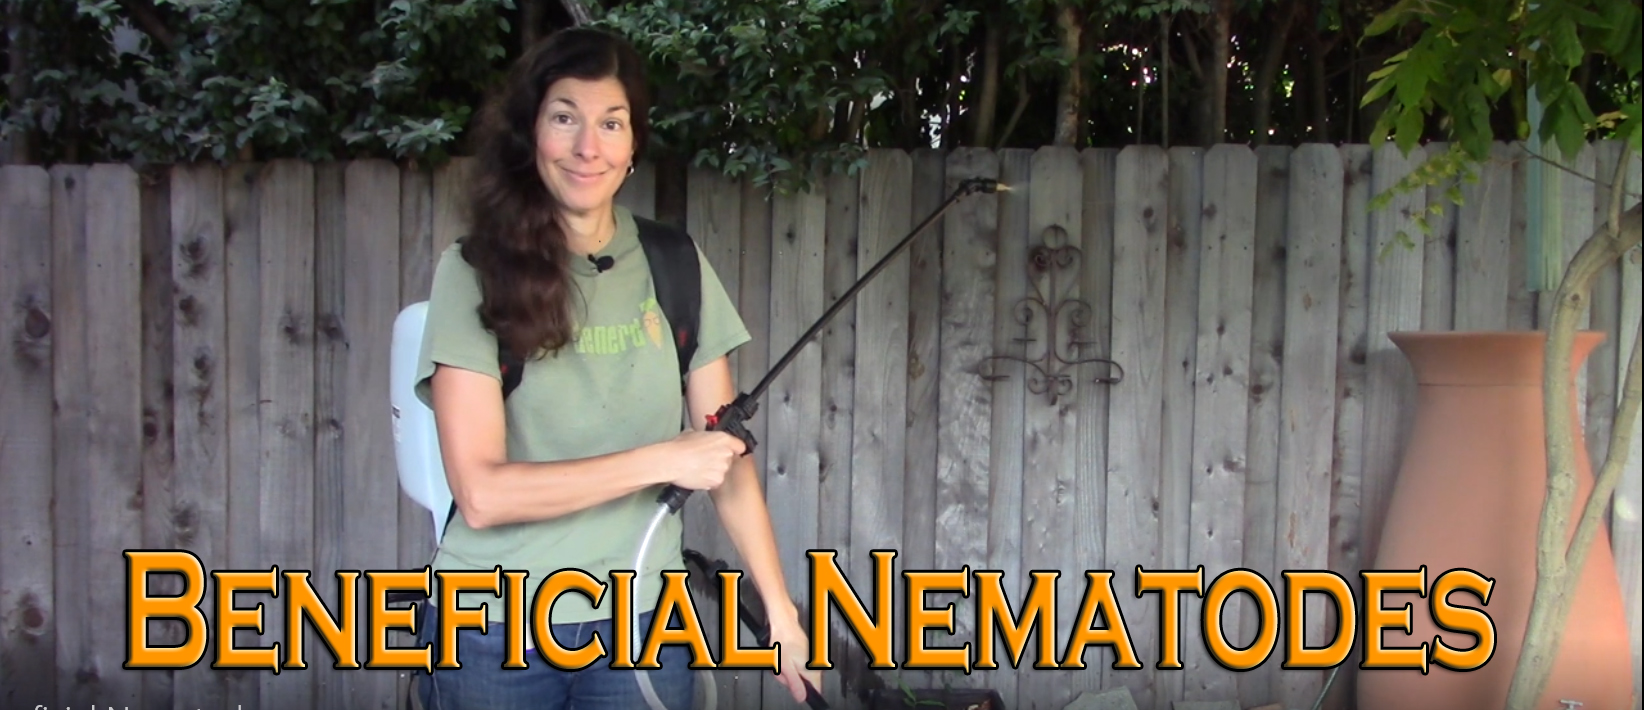 You are currently viewing YouTube: How to Apply Beneficial Nematodes to Control Pests in Your Garden